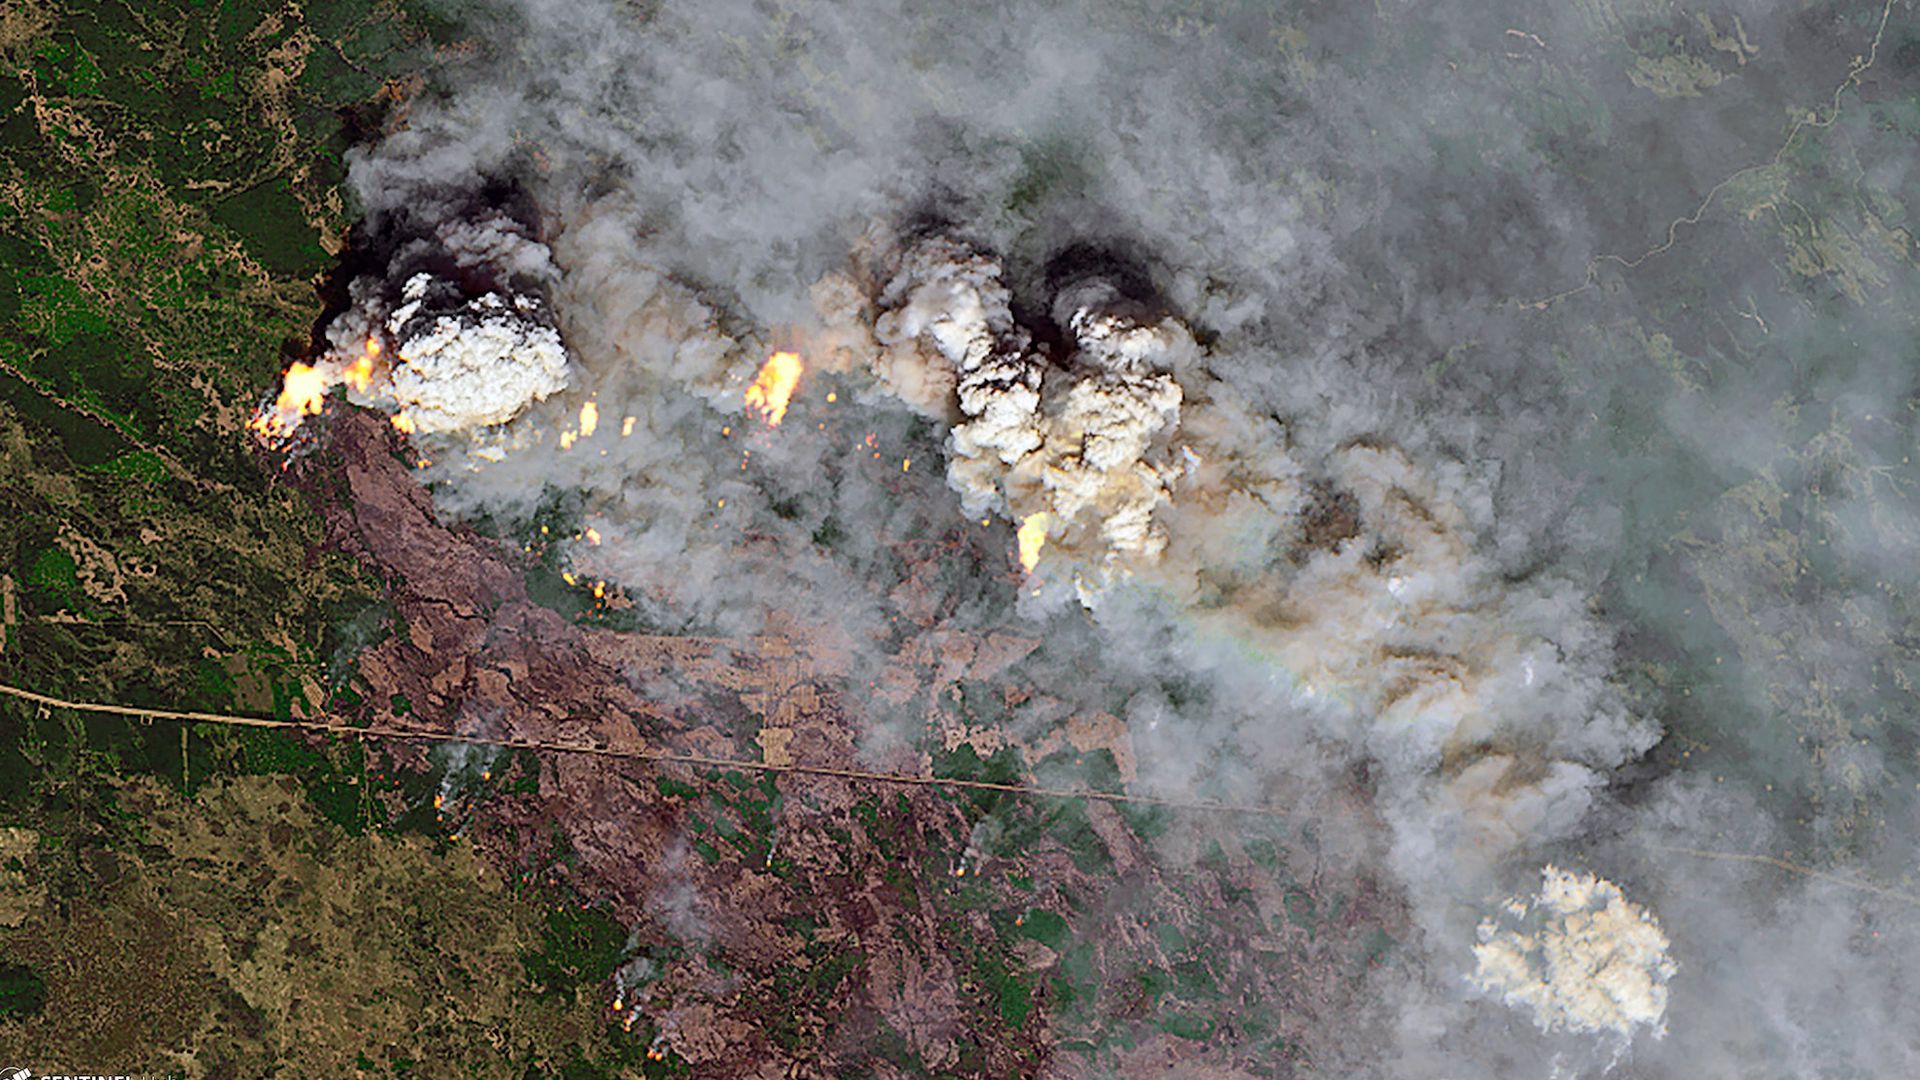 Pyrocumulus clouds from Alberta wildfires seen via satellite imagery.